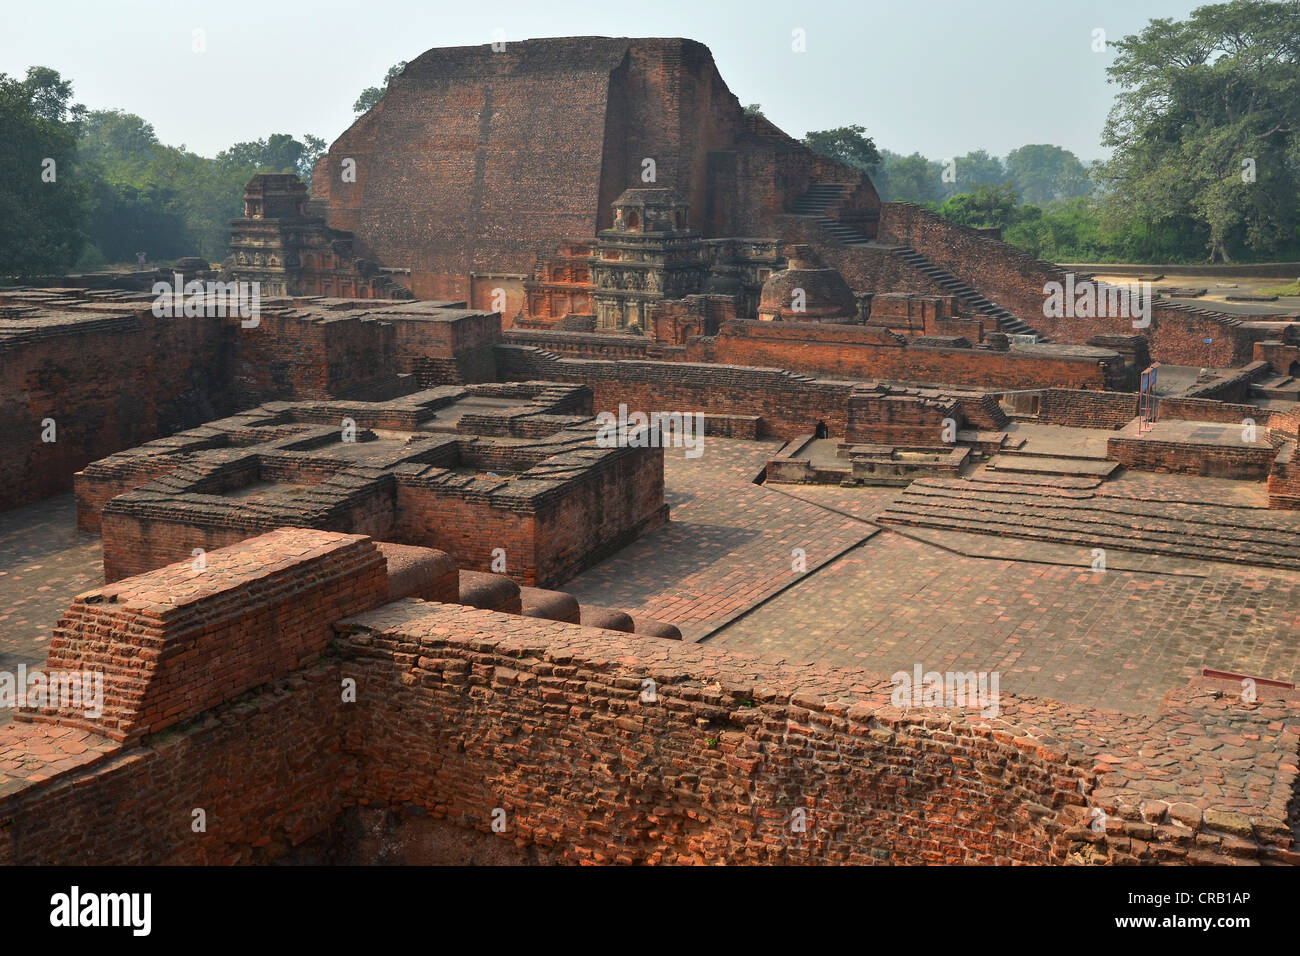 Archaeological site and an important Buddhist pilgrimage destination, ruins of the ancient university of Nalanda, Global Stock Photo